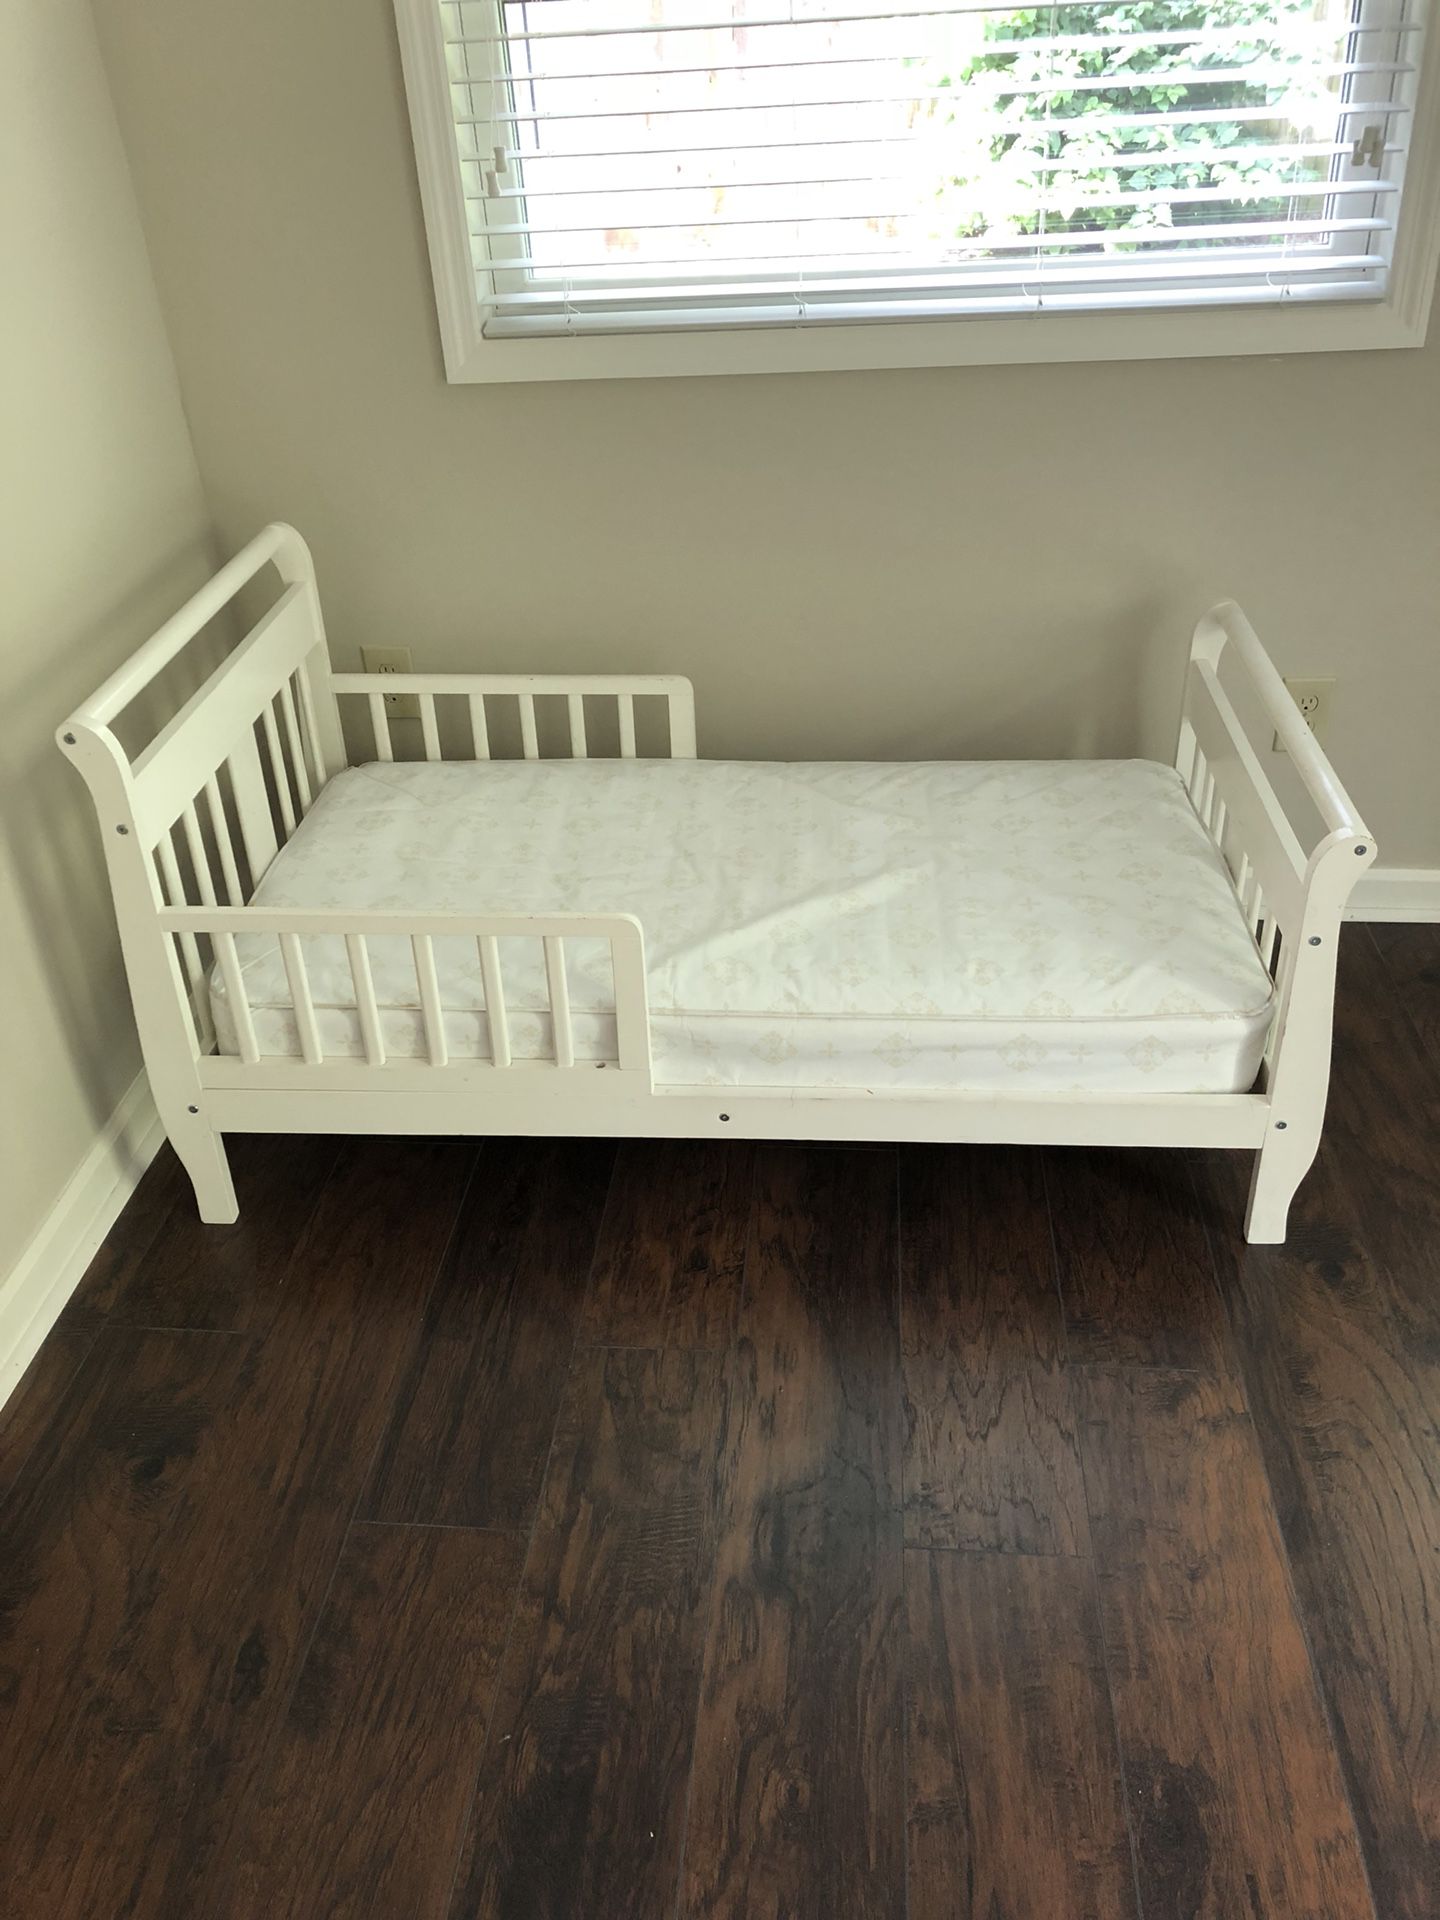 White toddler bed and mattress